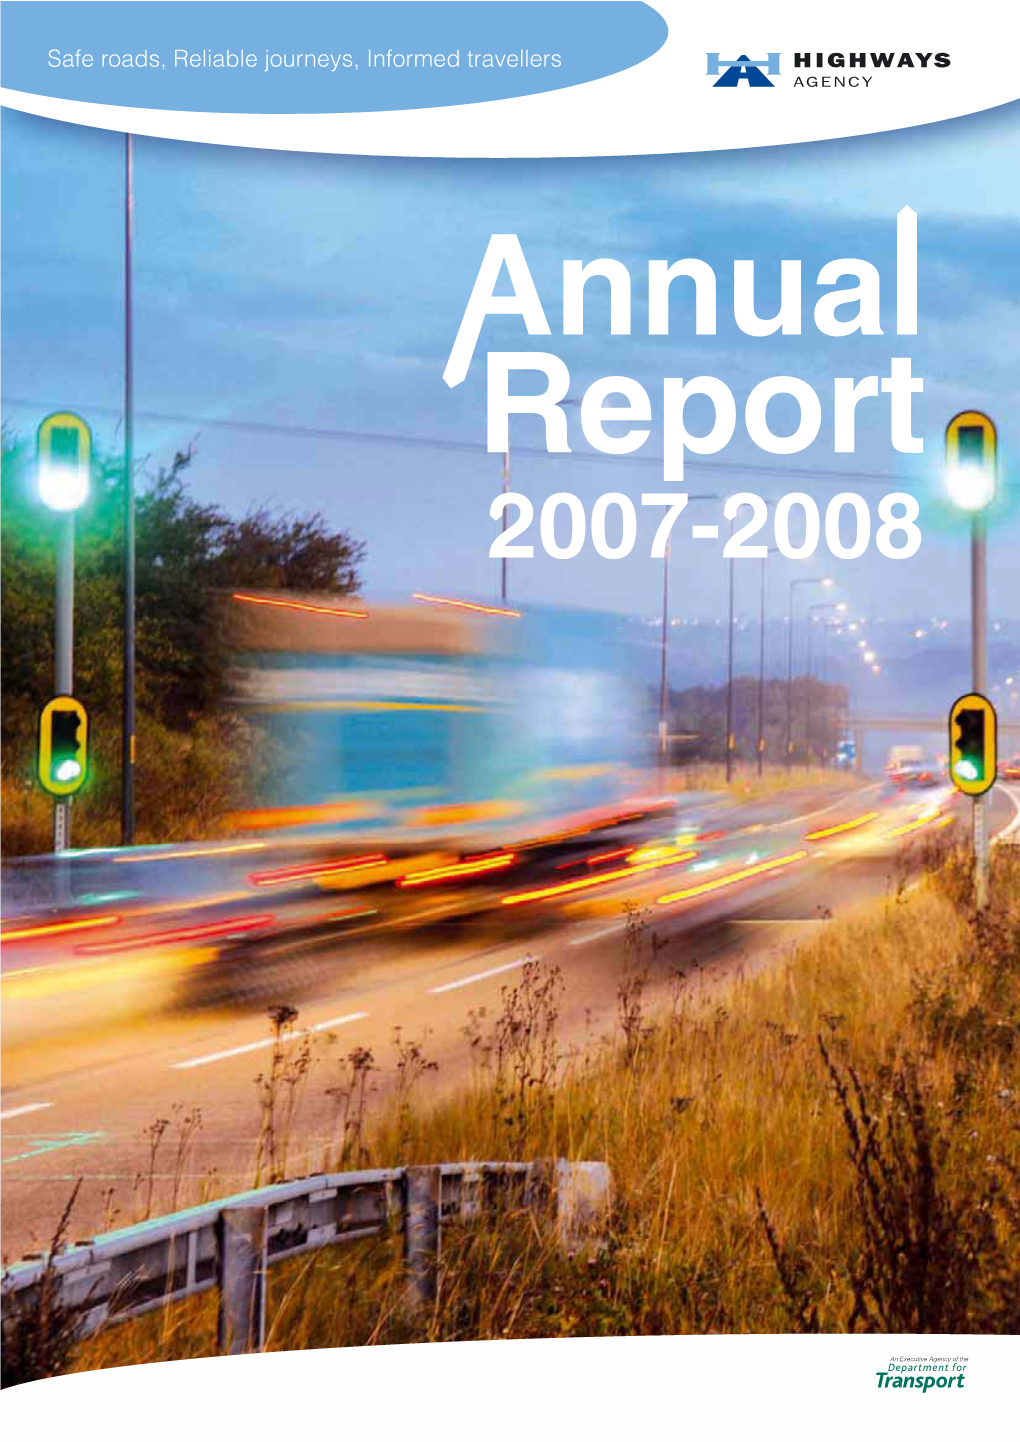 The Highways Agency Annual Reports and Accounts 2007-2008